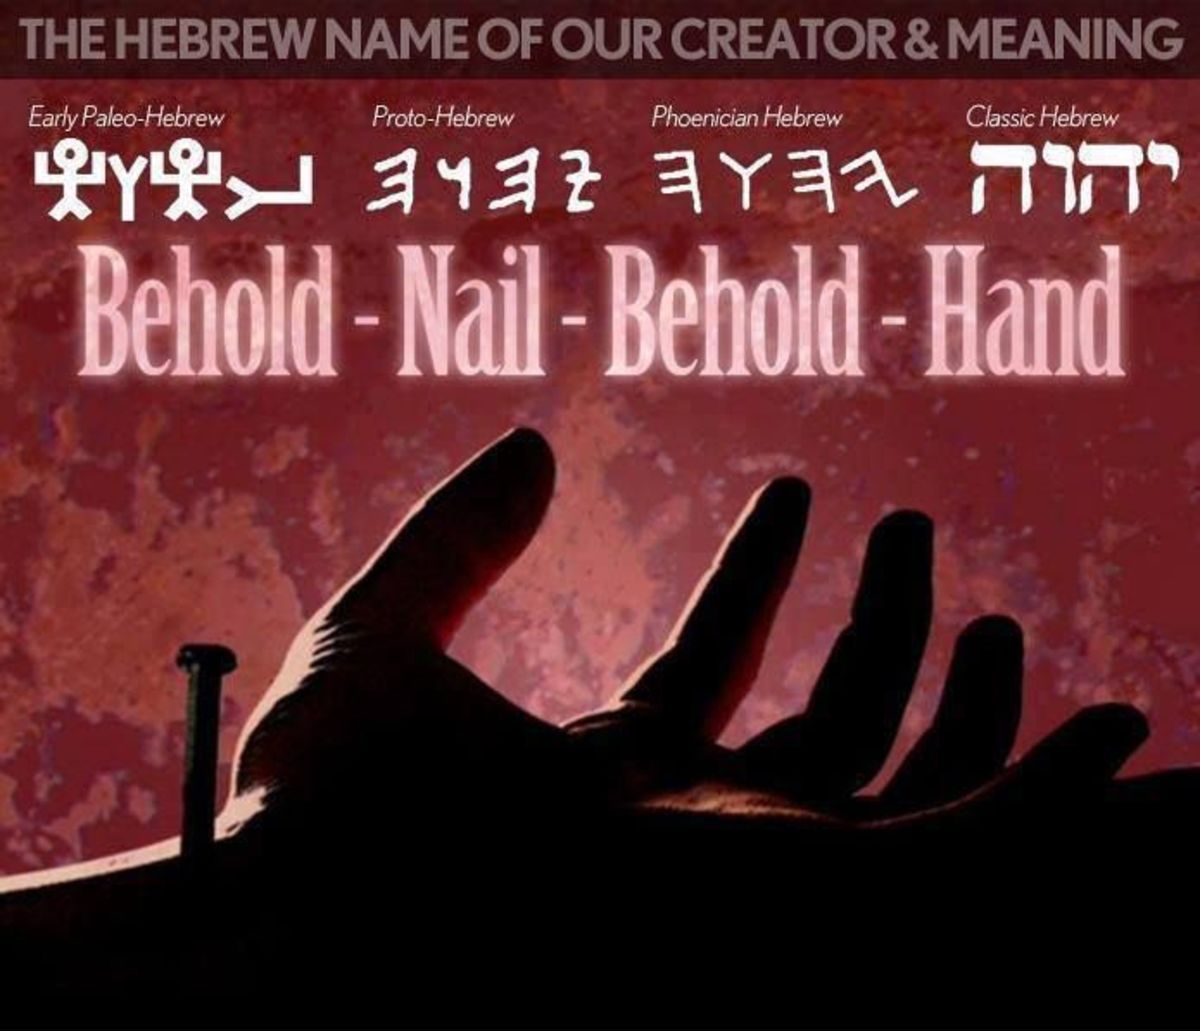 The name of YHWH. 